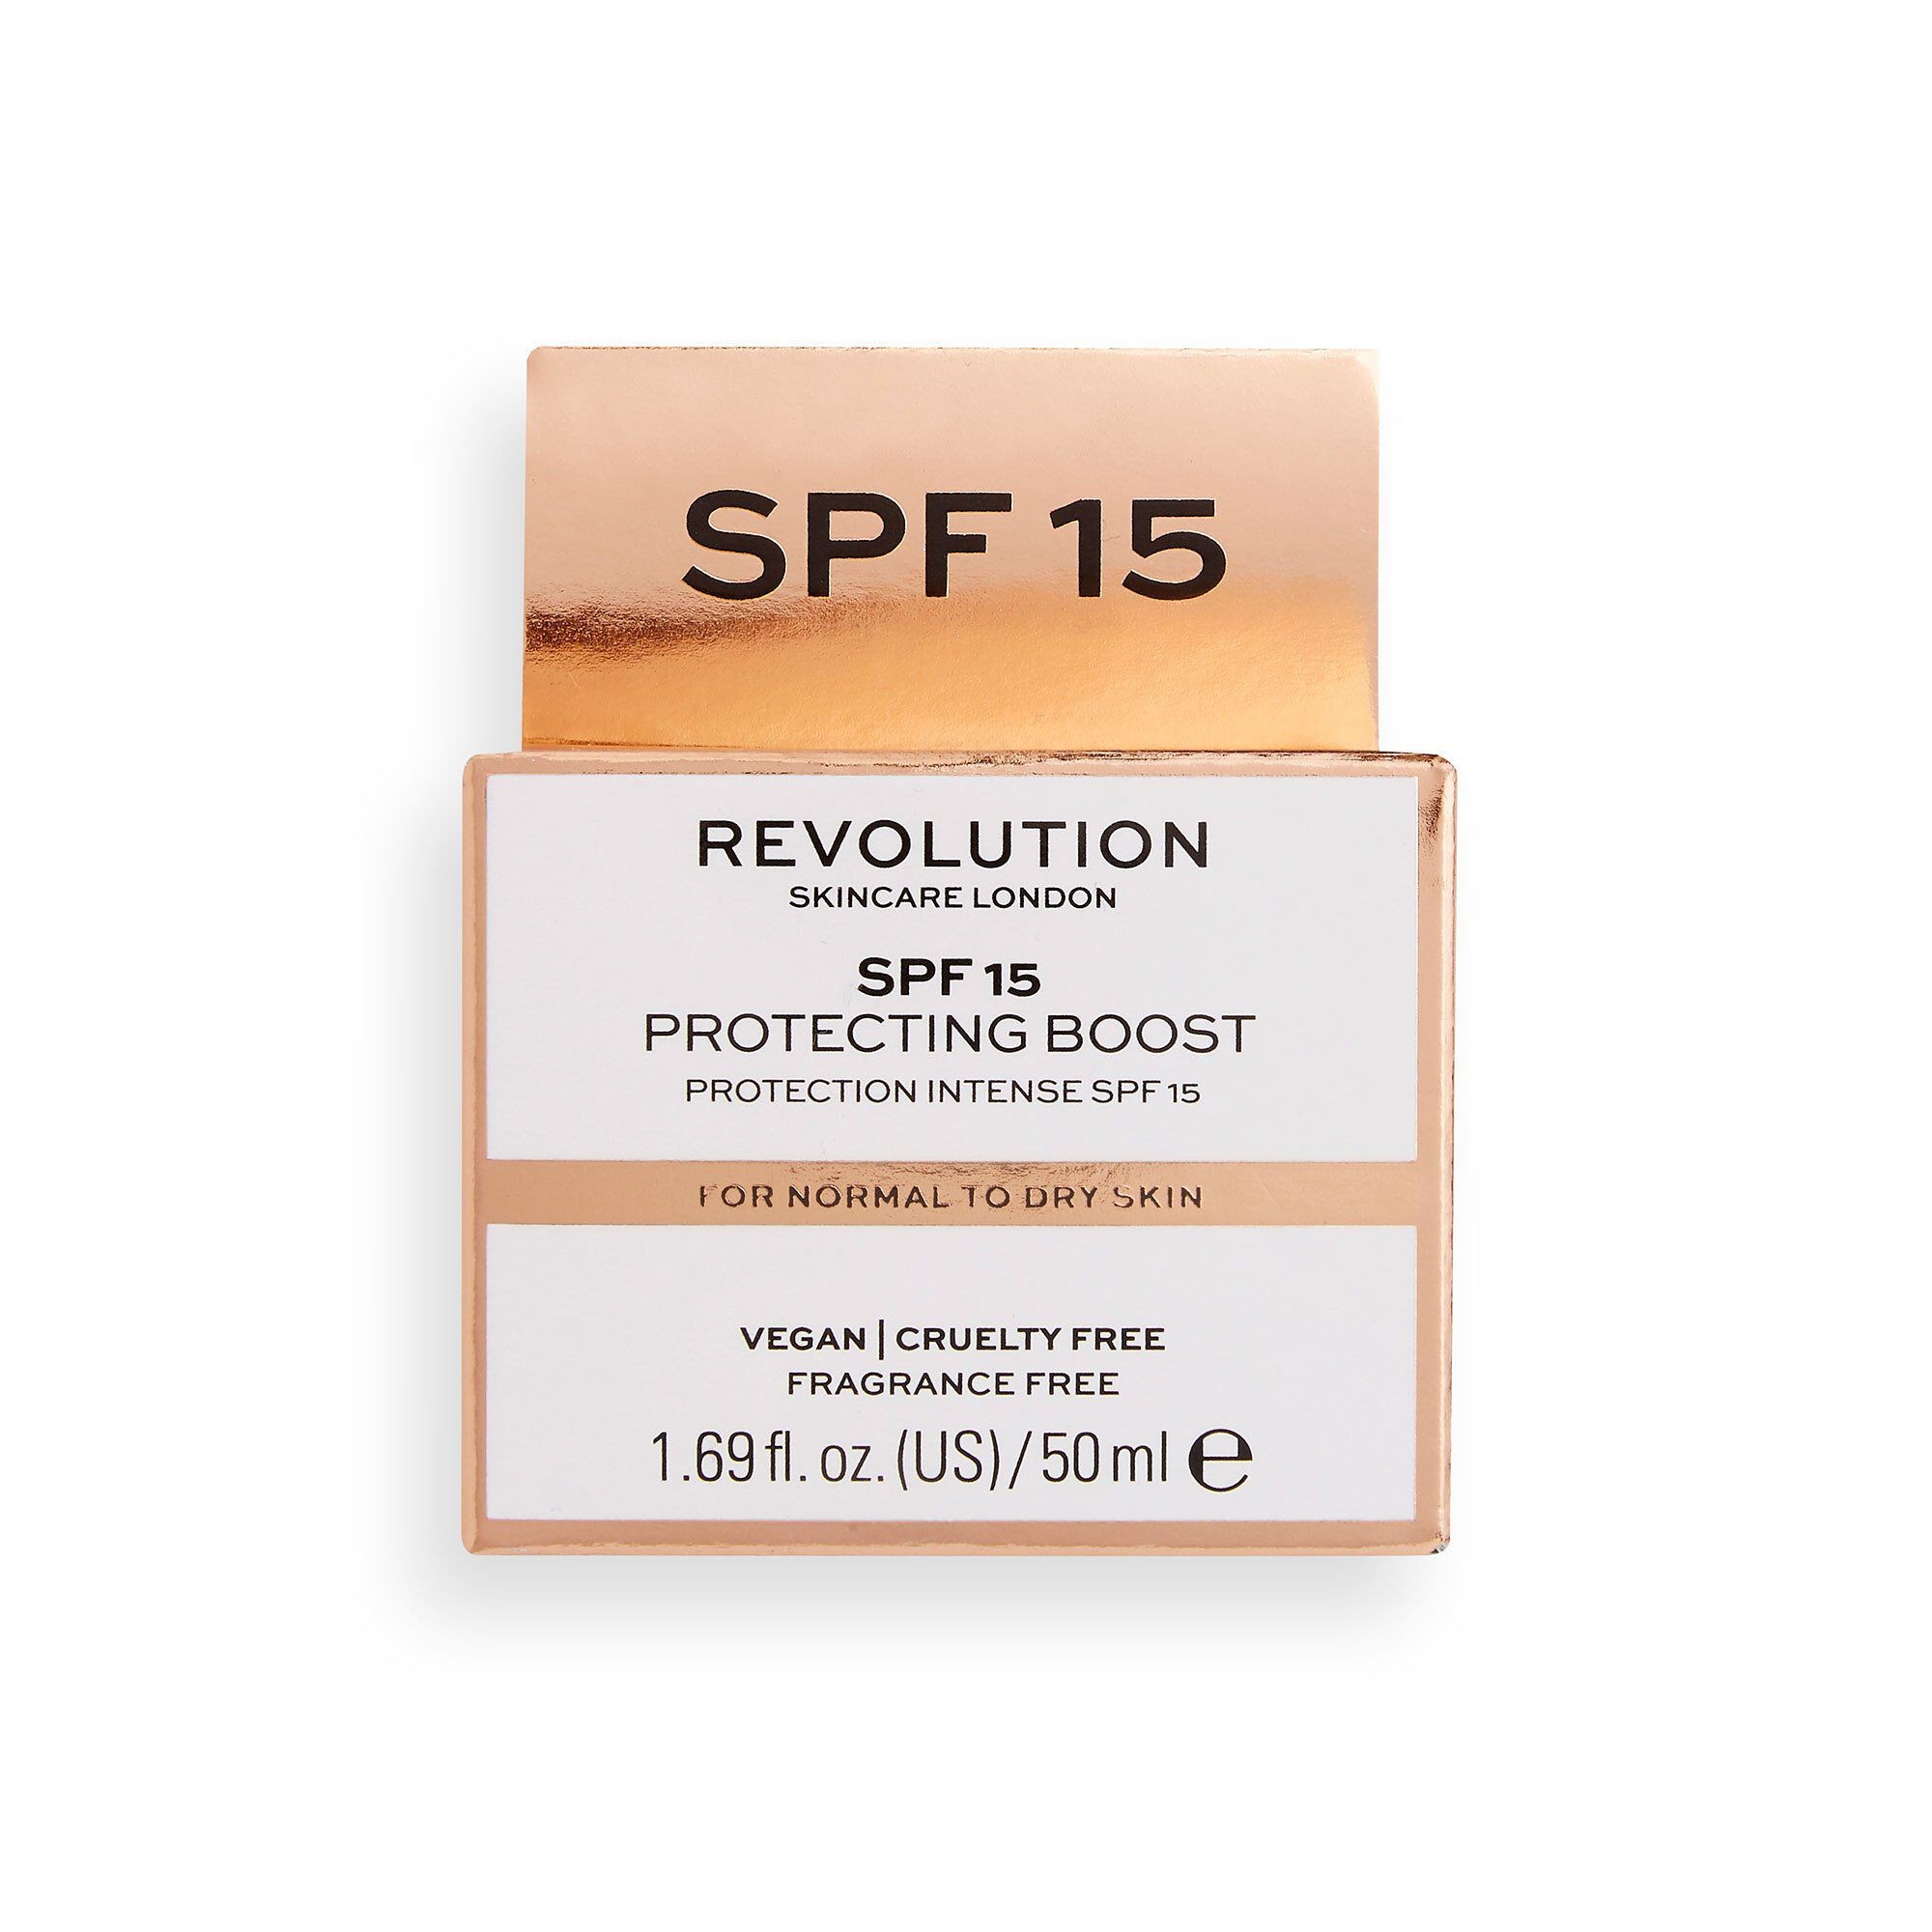 Gesichtscreme - Protecting Boost SPF15 - Normal to Dry Skin 